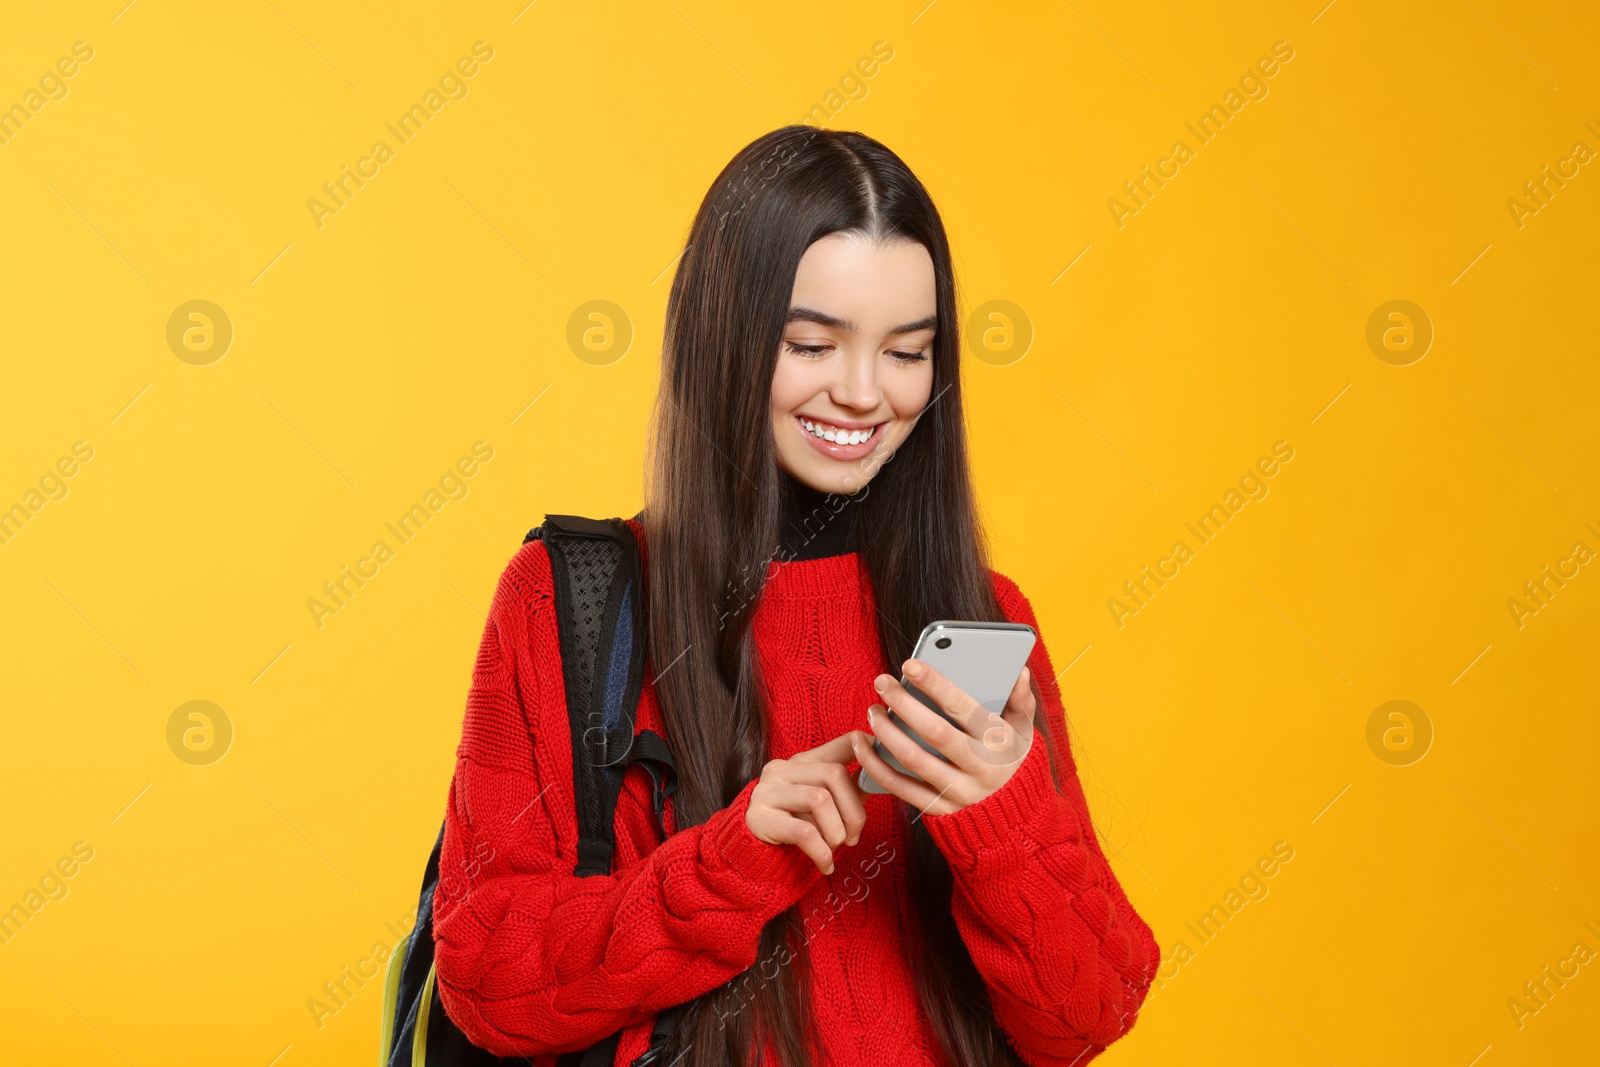 Photo of Happy teenage girl with backpack and smartphone on yellow background